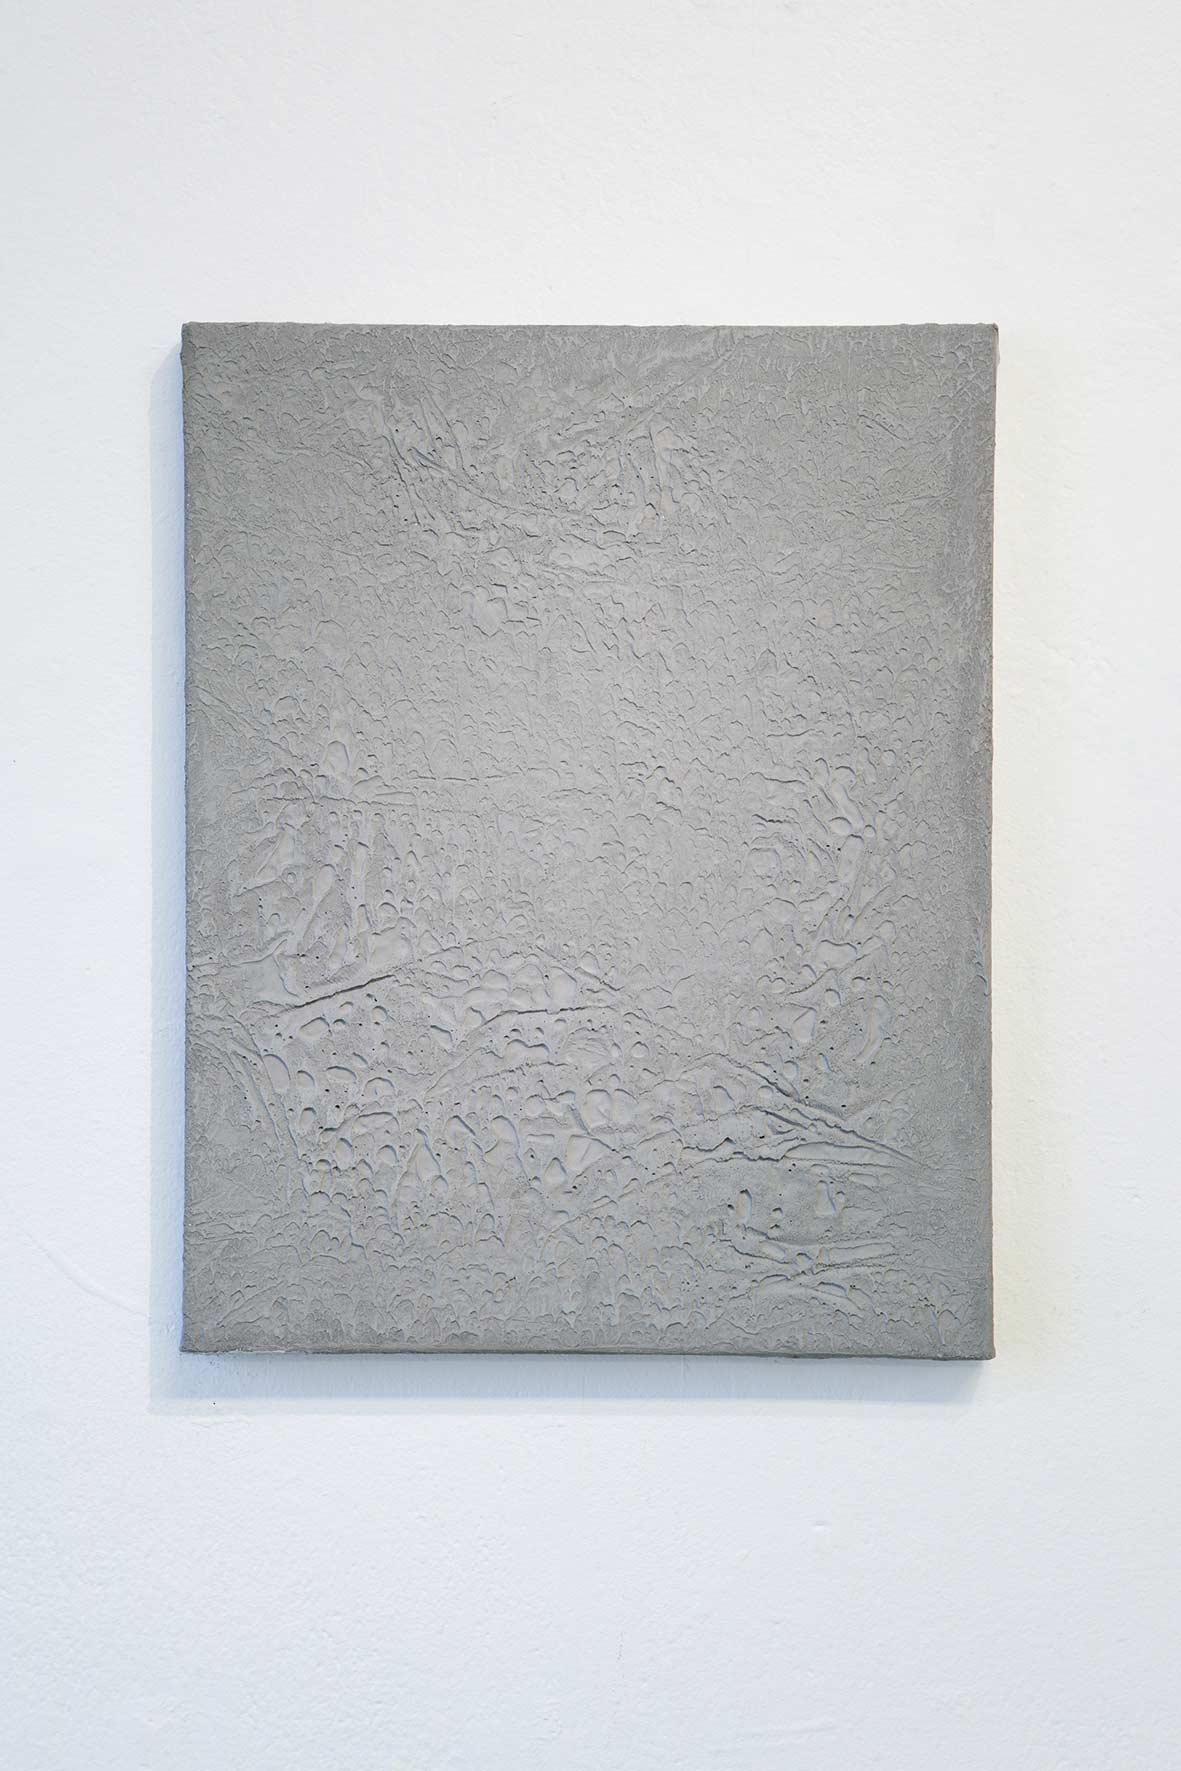 Untitled, 2015, concrete and acrylic on canvas, cm. 42 x 33